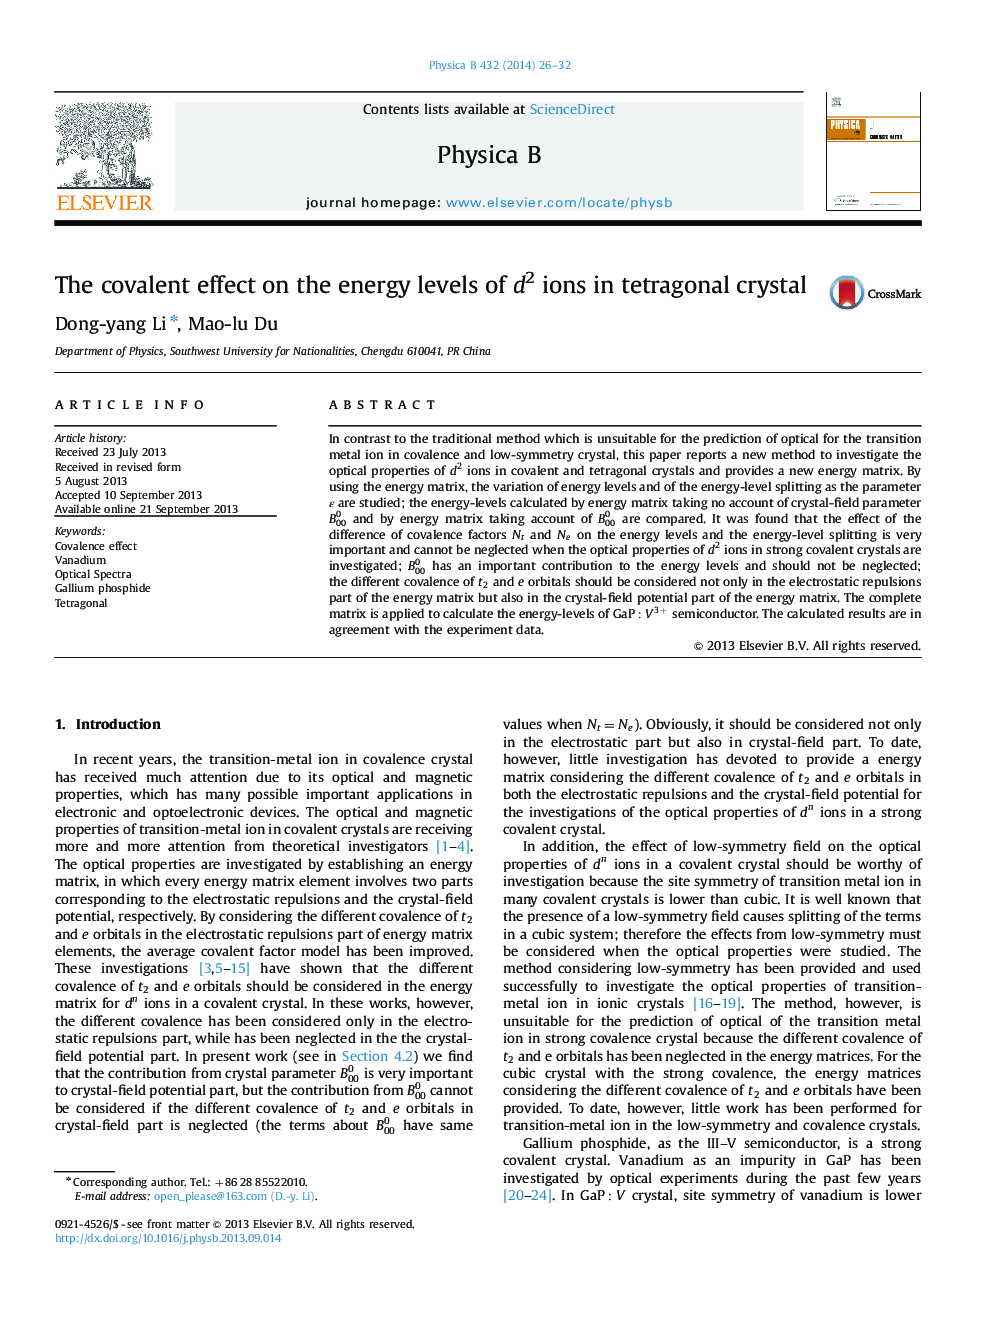 The covalent effect on the energy levels of d2 ions in tetragonal crystal